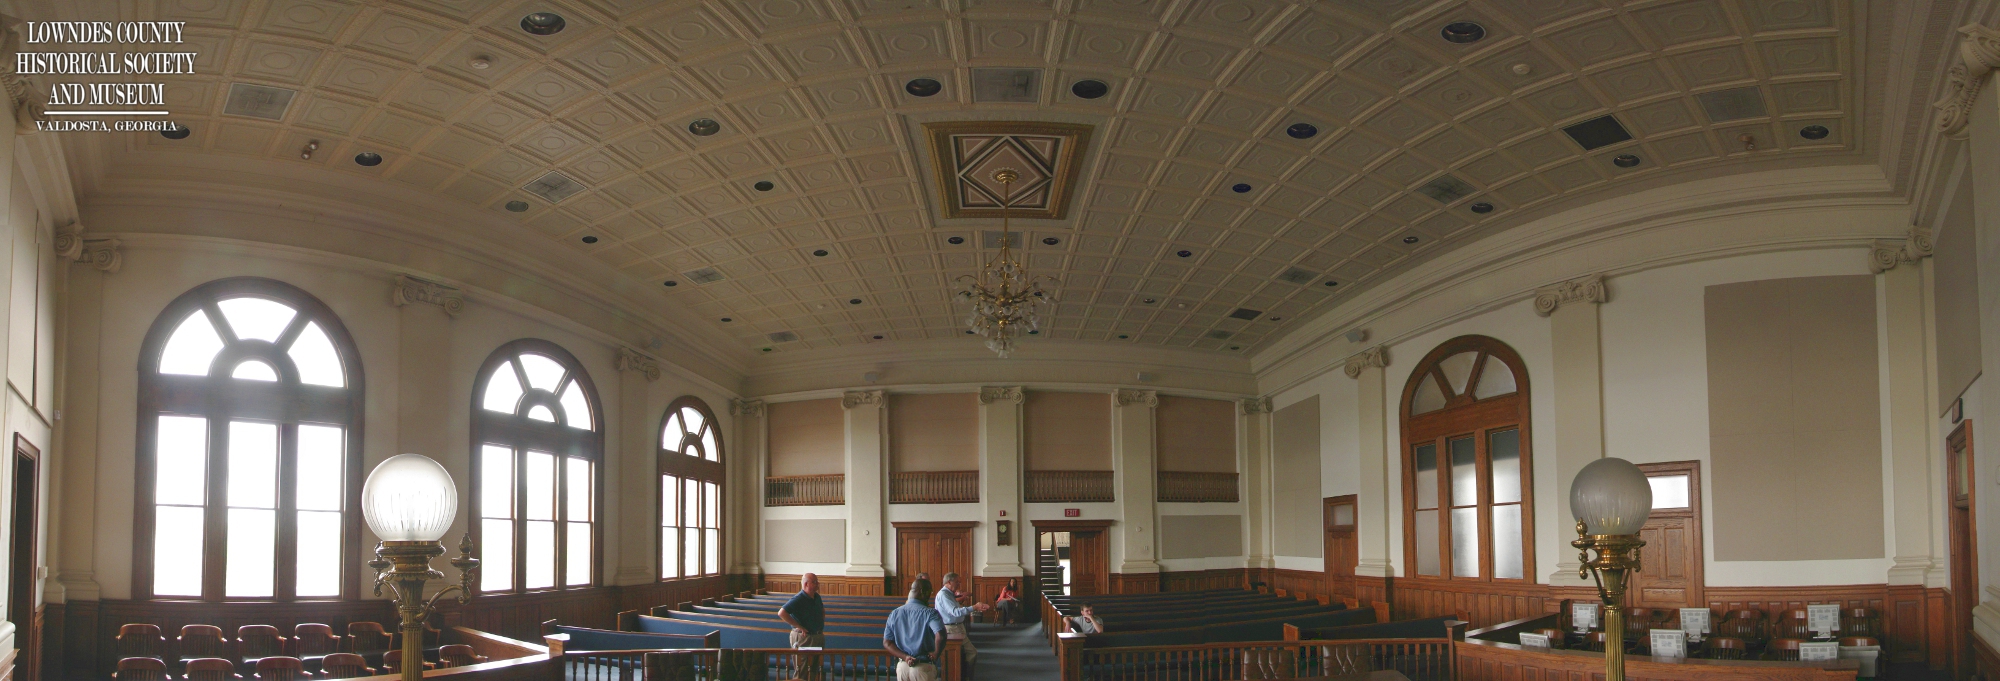 Main court room in the historic courthouse, 2012